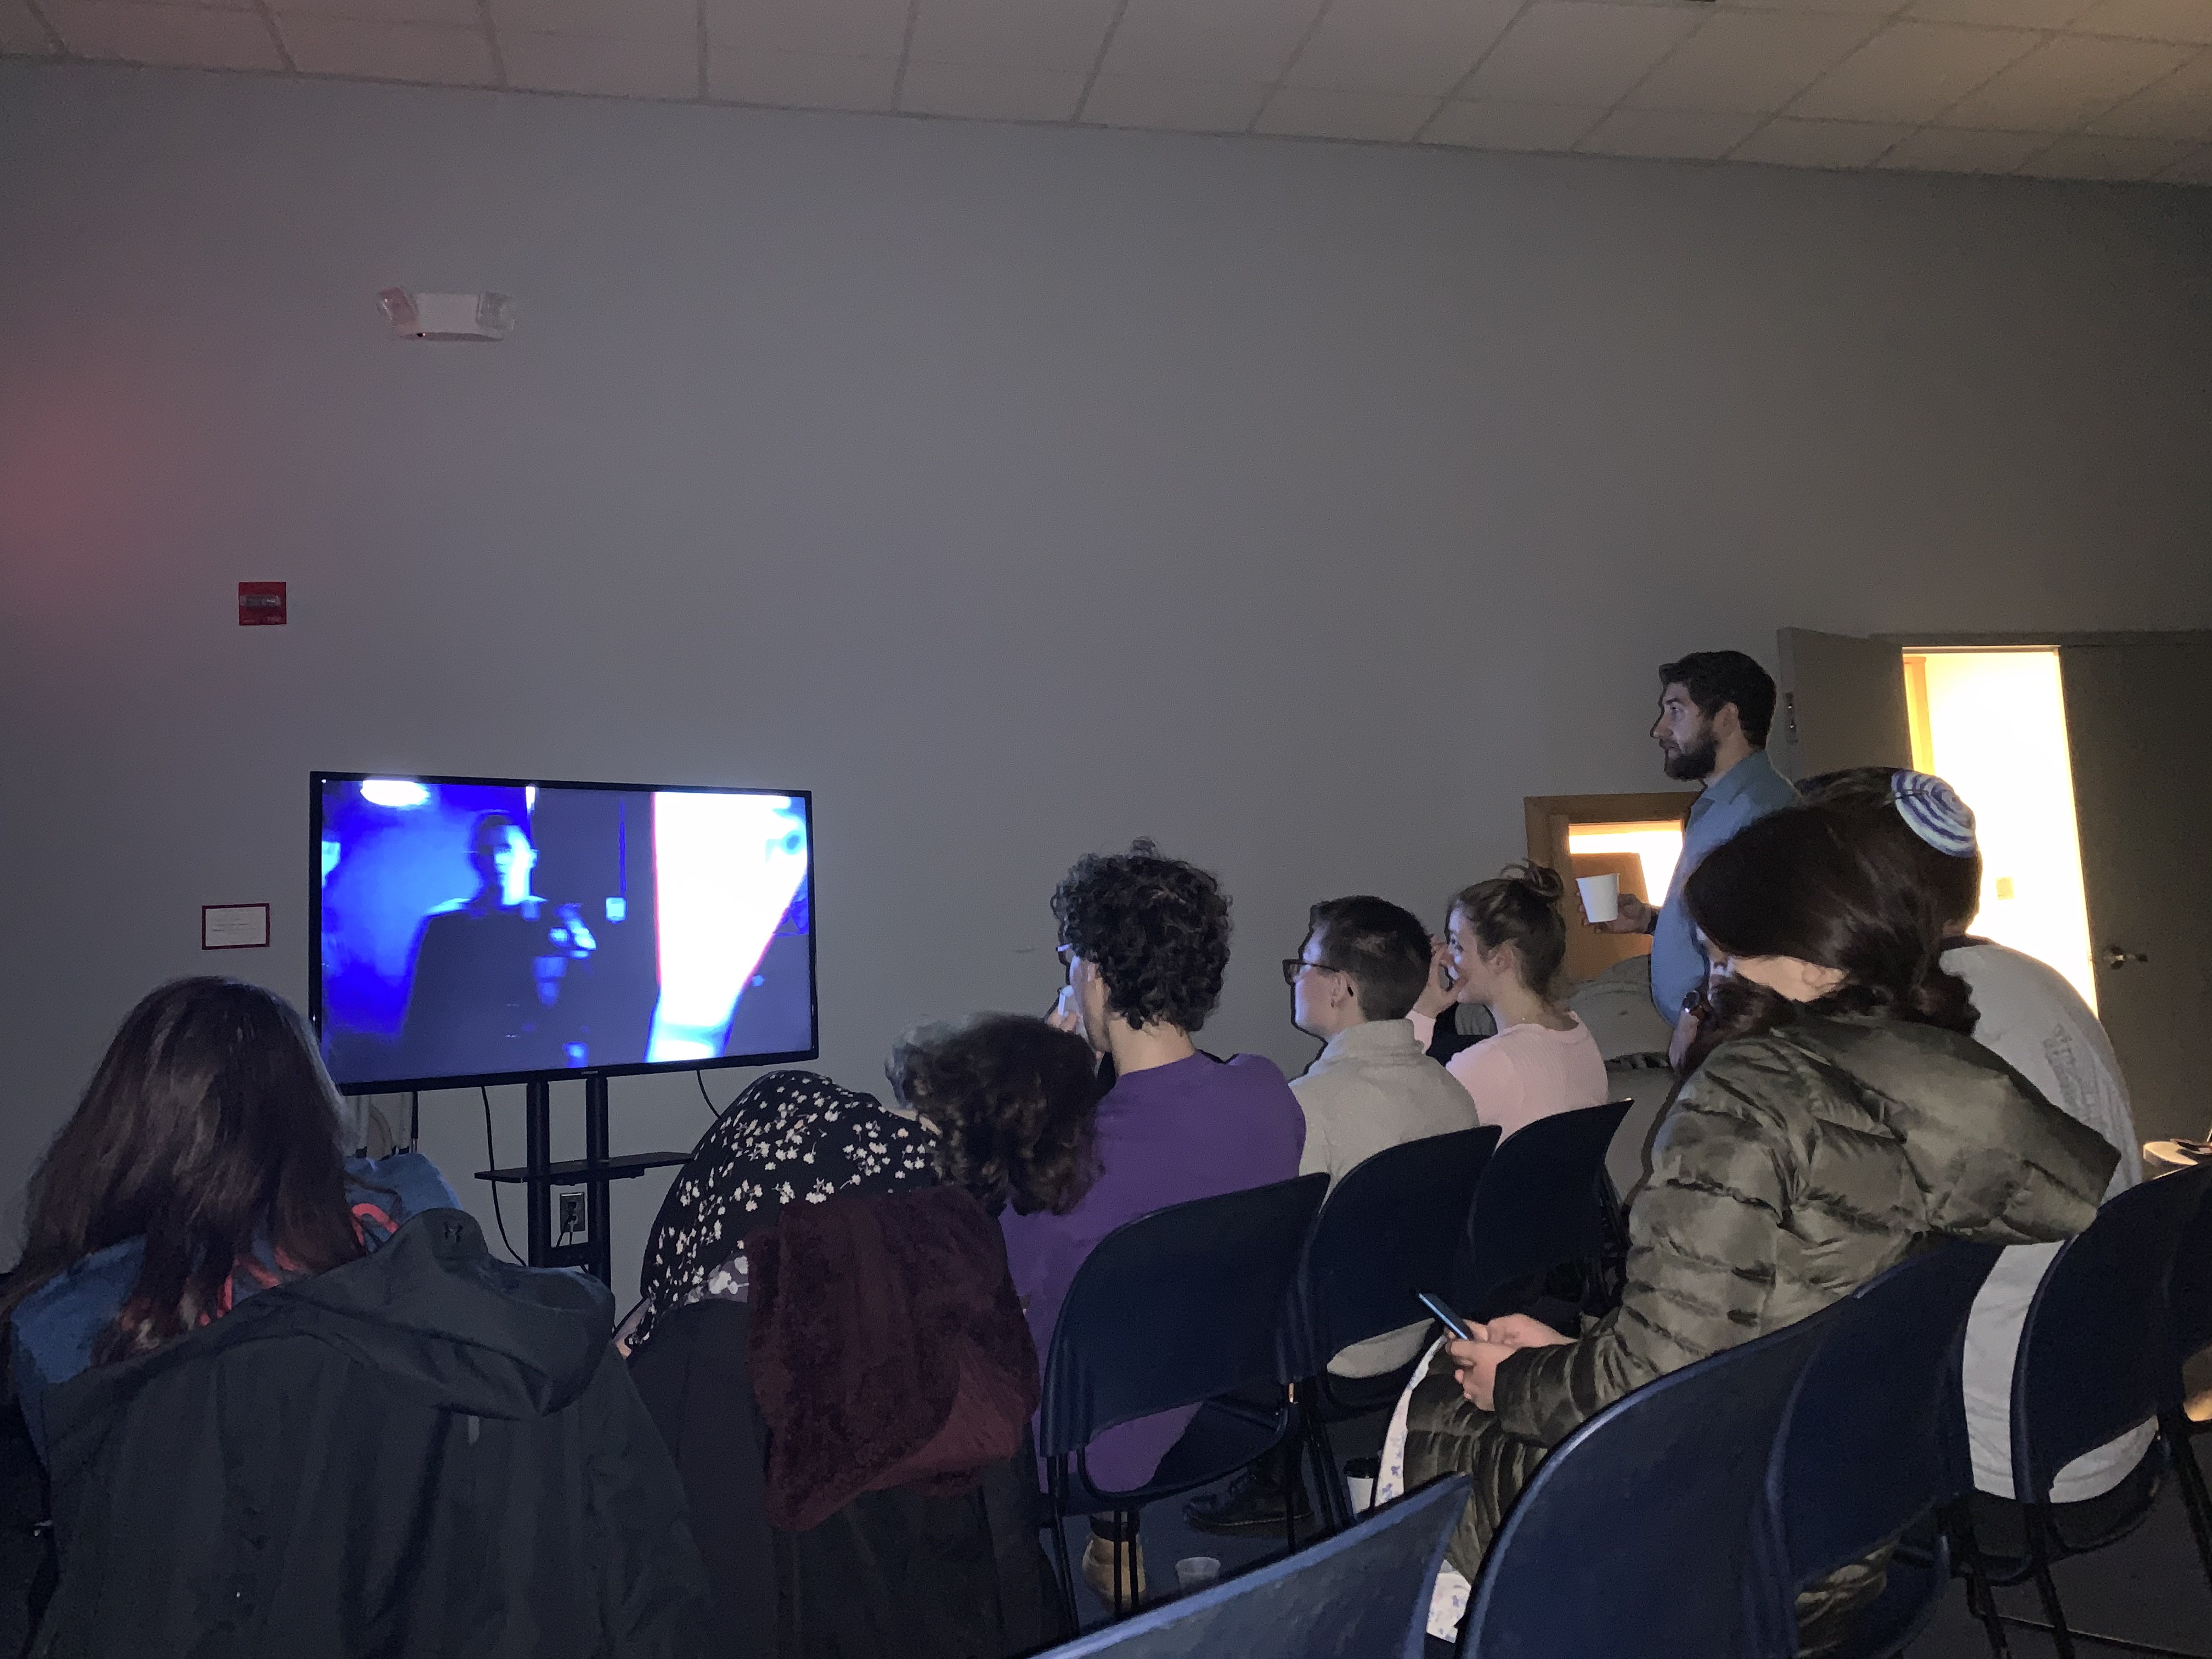 Ometz entertains students with its first movie night